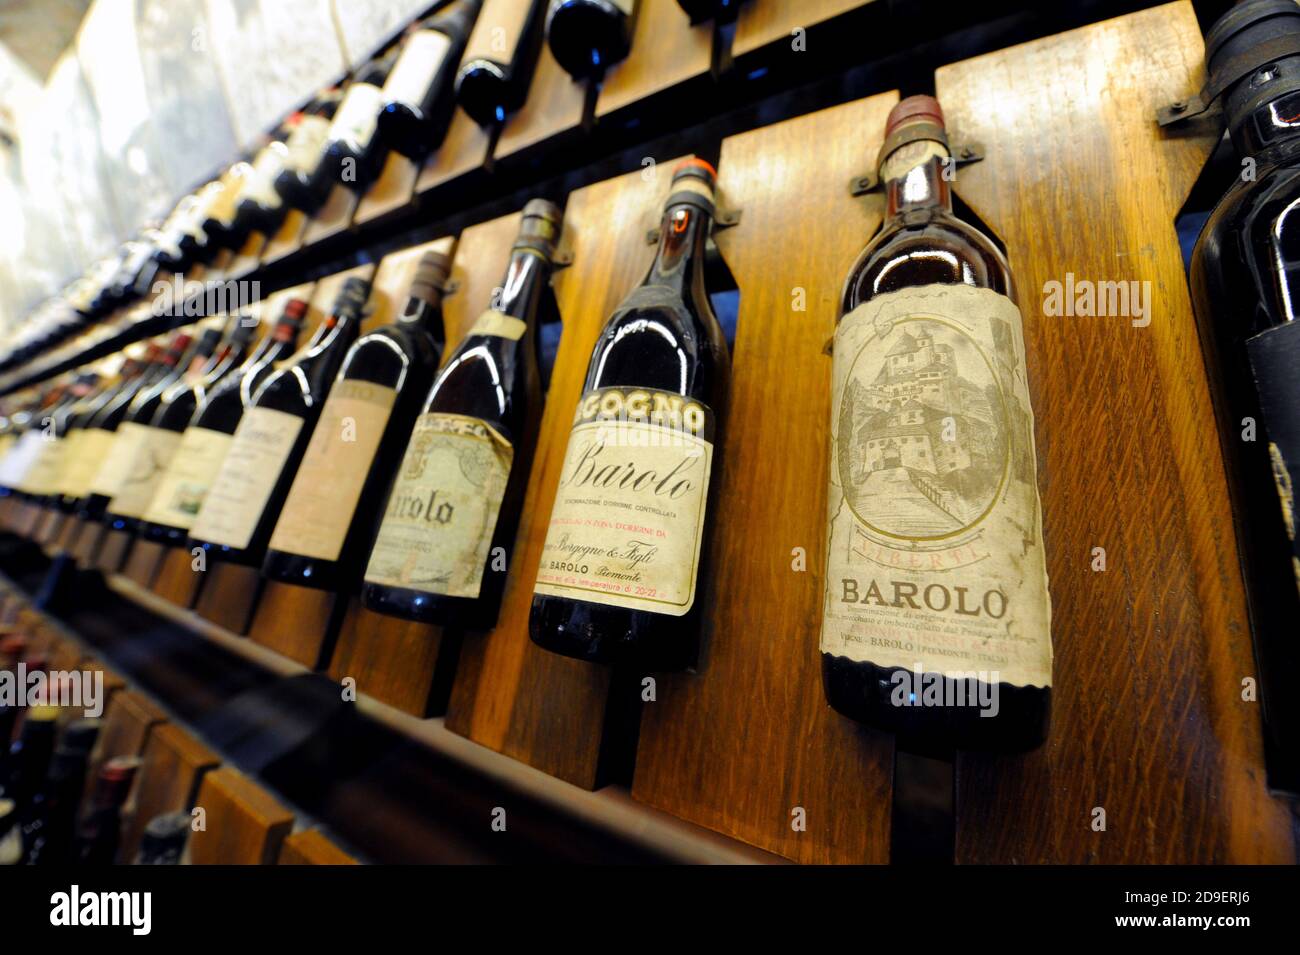 Vintage red wine bottles displayed at the Barolo wine museum, in Barolo, Piemonte, Italy. Stock Photo